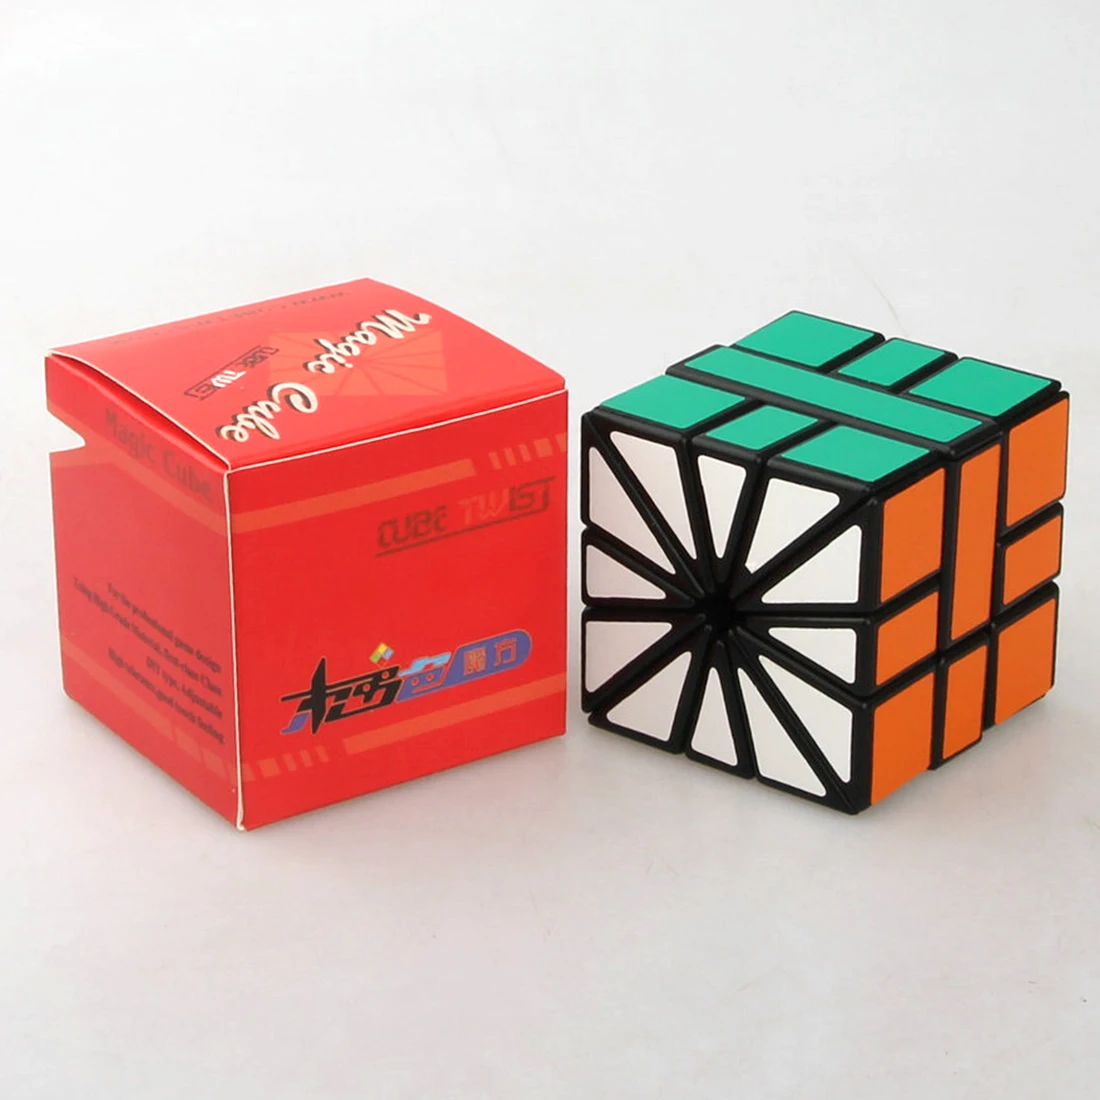 

CubeTwist Square II SQ2 3x3x3 Speed Cube Sector Magic Cube Toy Speed Cube Puzzle Cubes Educational Toys For Kids Gifts - Black